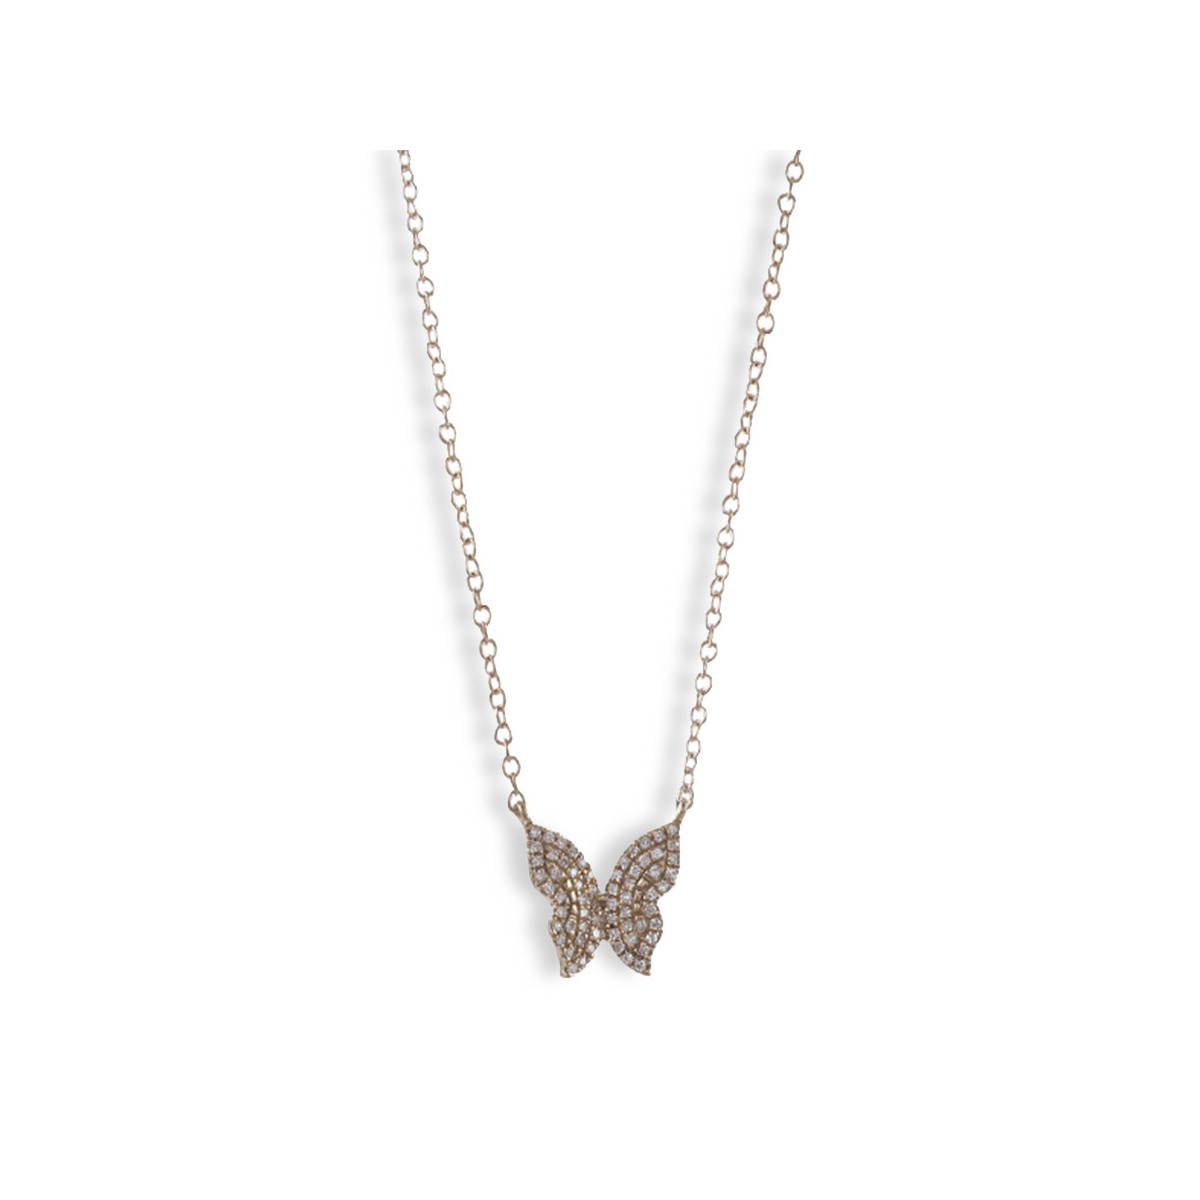 GOLD AND DIAMOND NECKLACE